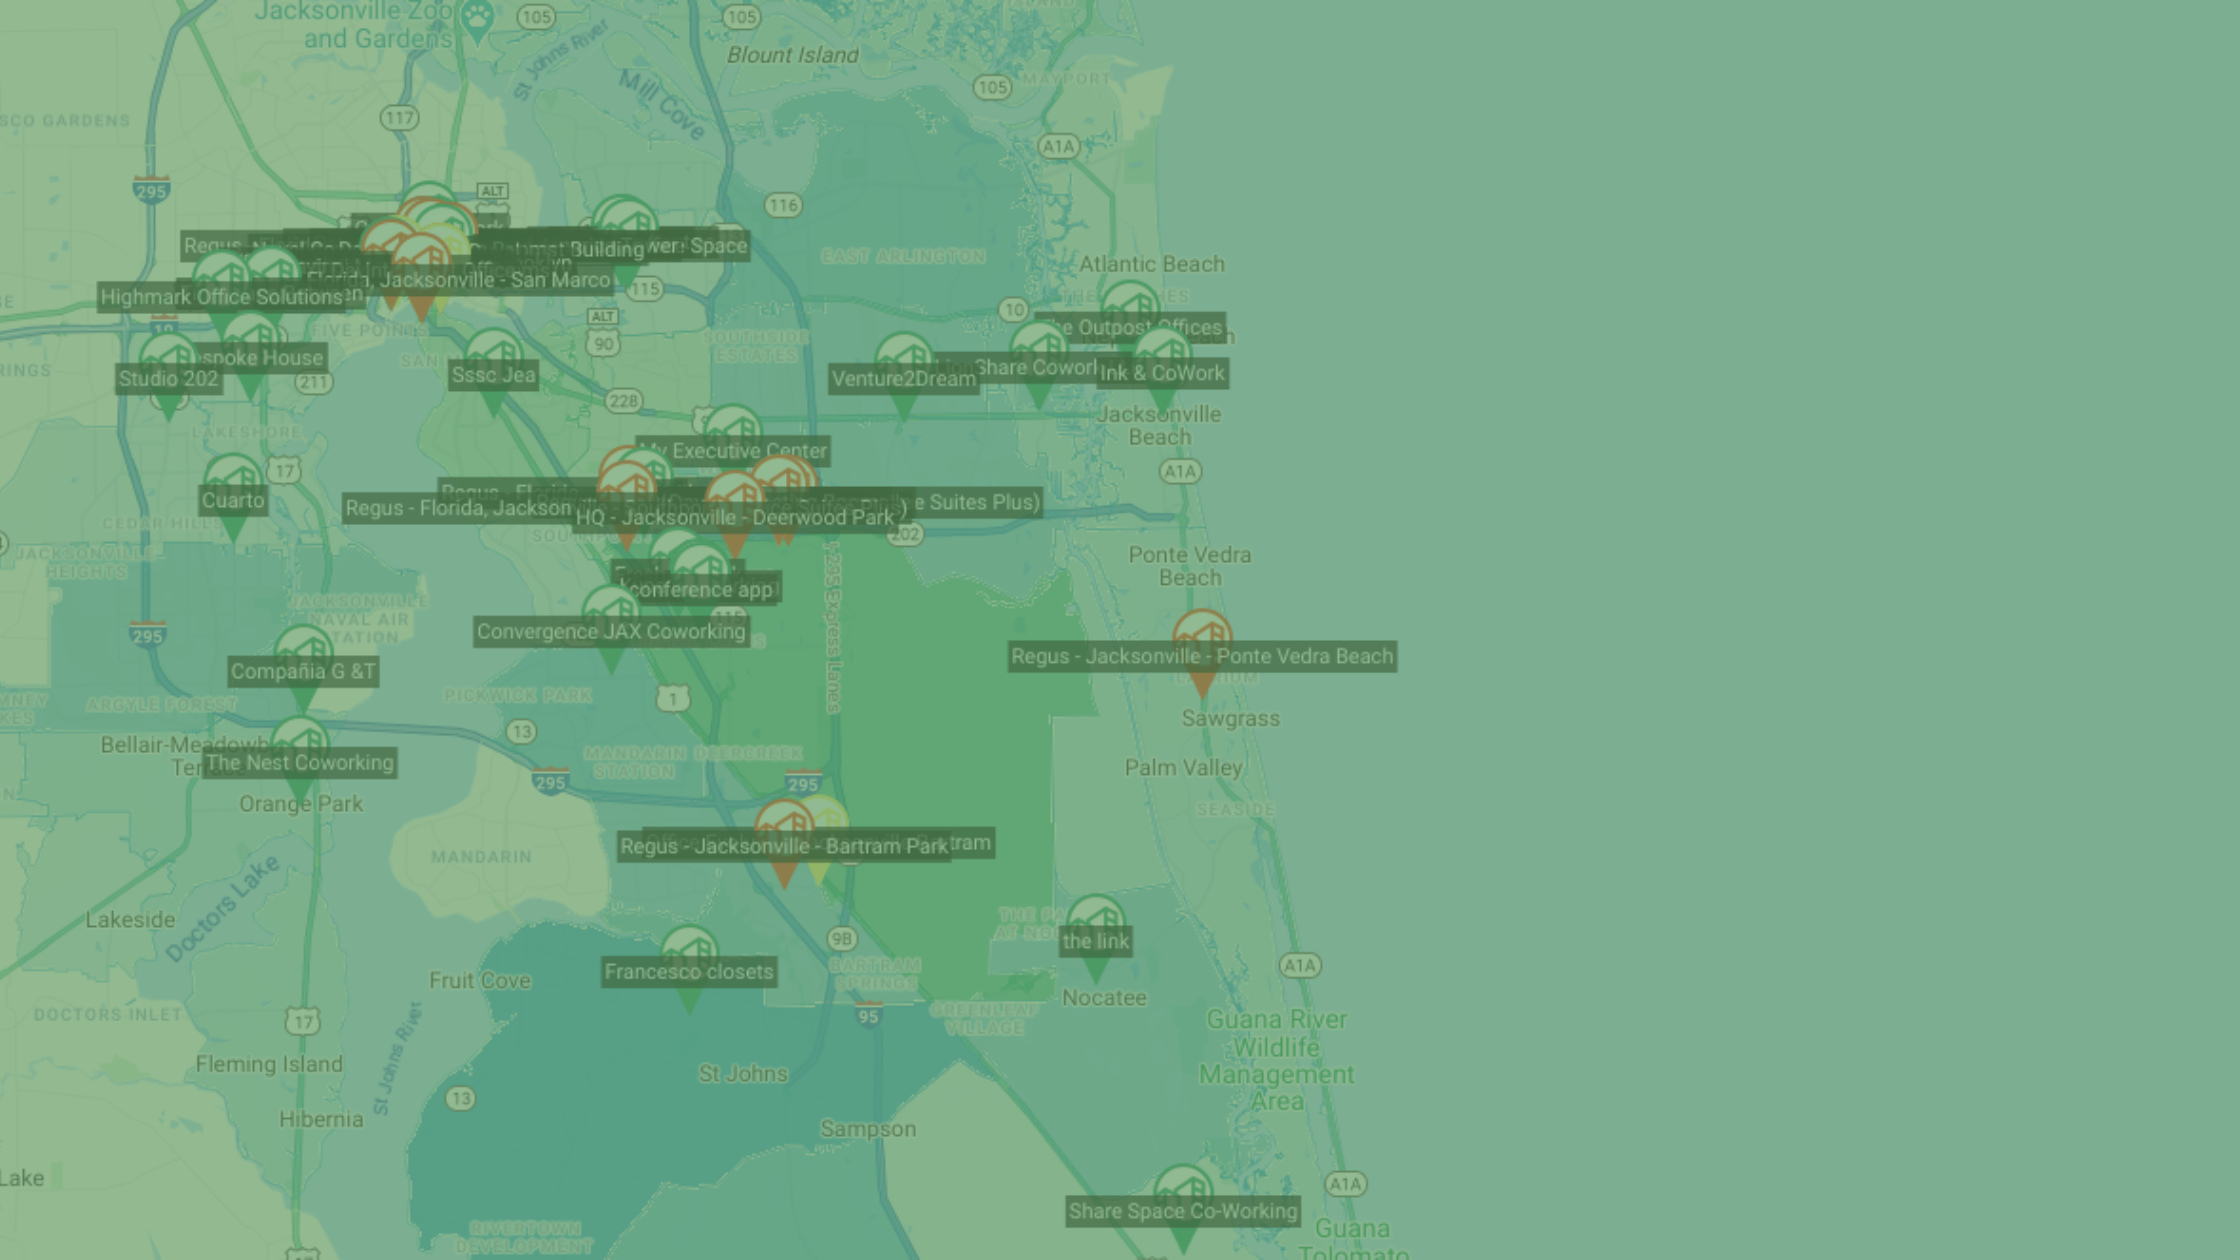 Coworking Map of Jacksonville, FL